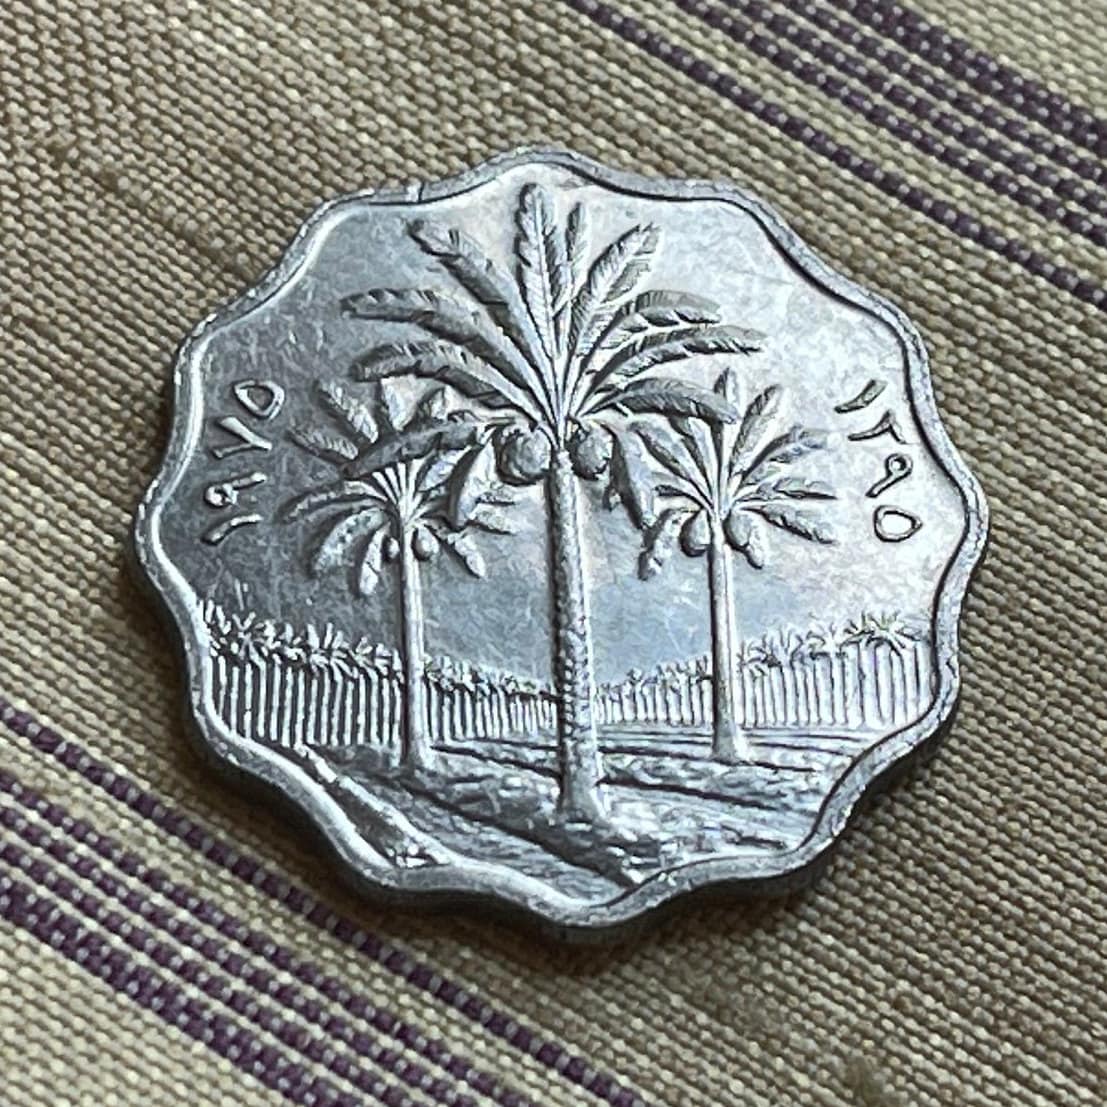 Date Palm Trees 5 Fils Iraq Authentic Coin Money for Jewelry and Craft Making (Scalloped)